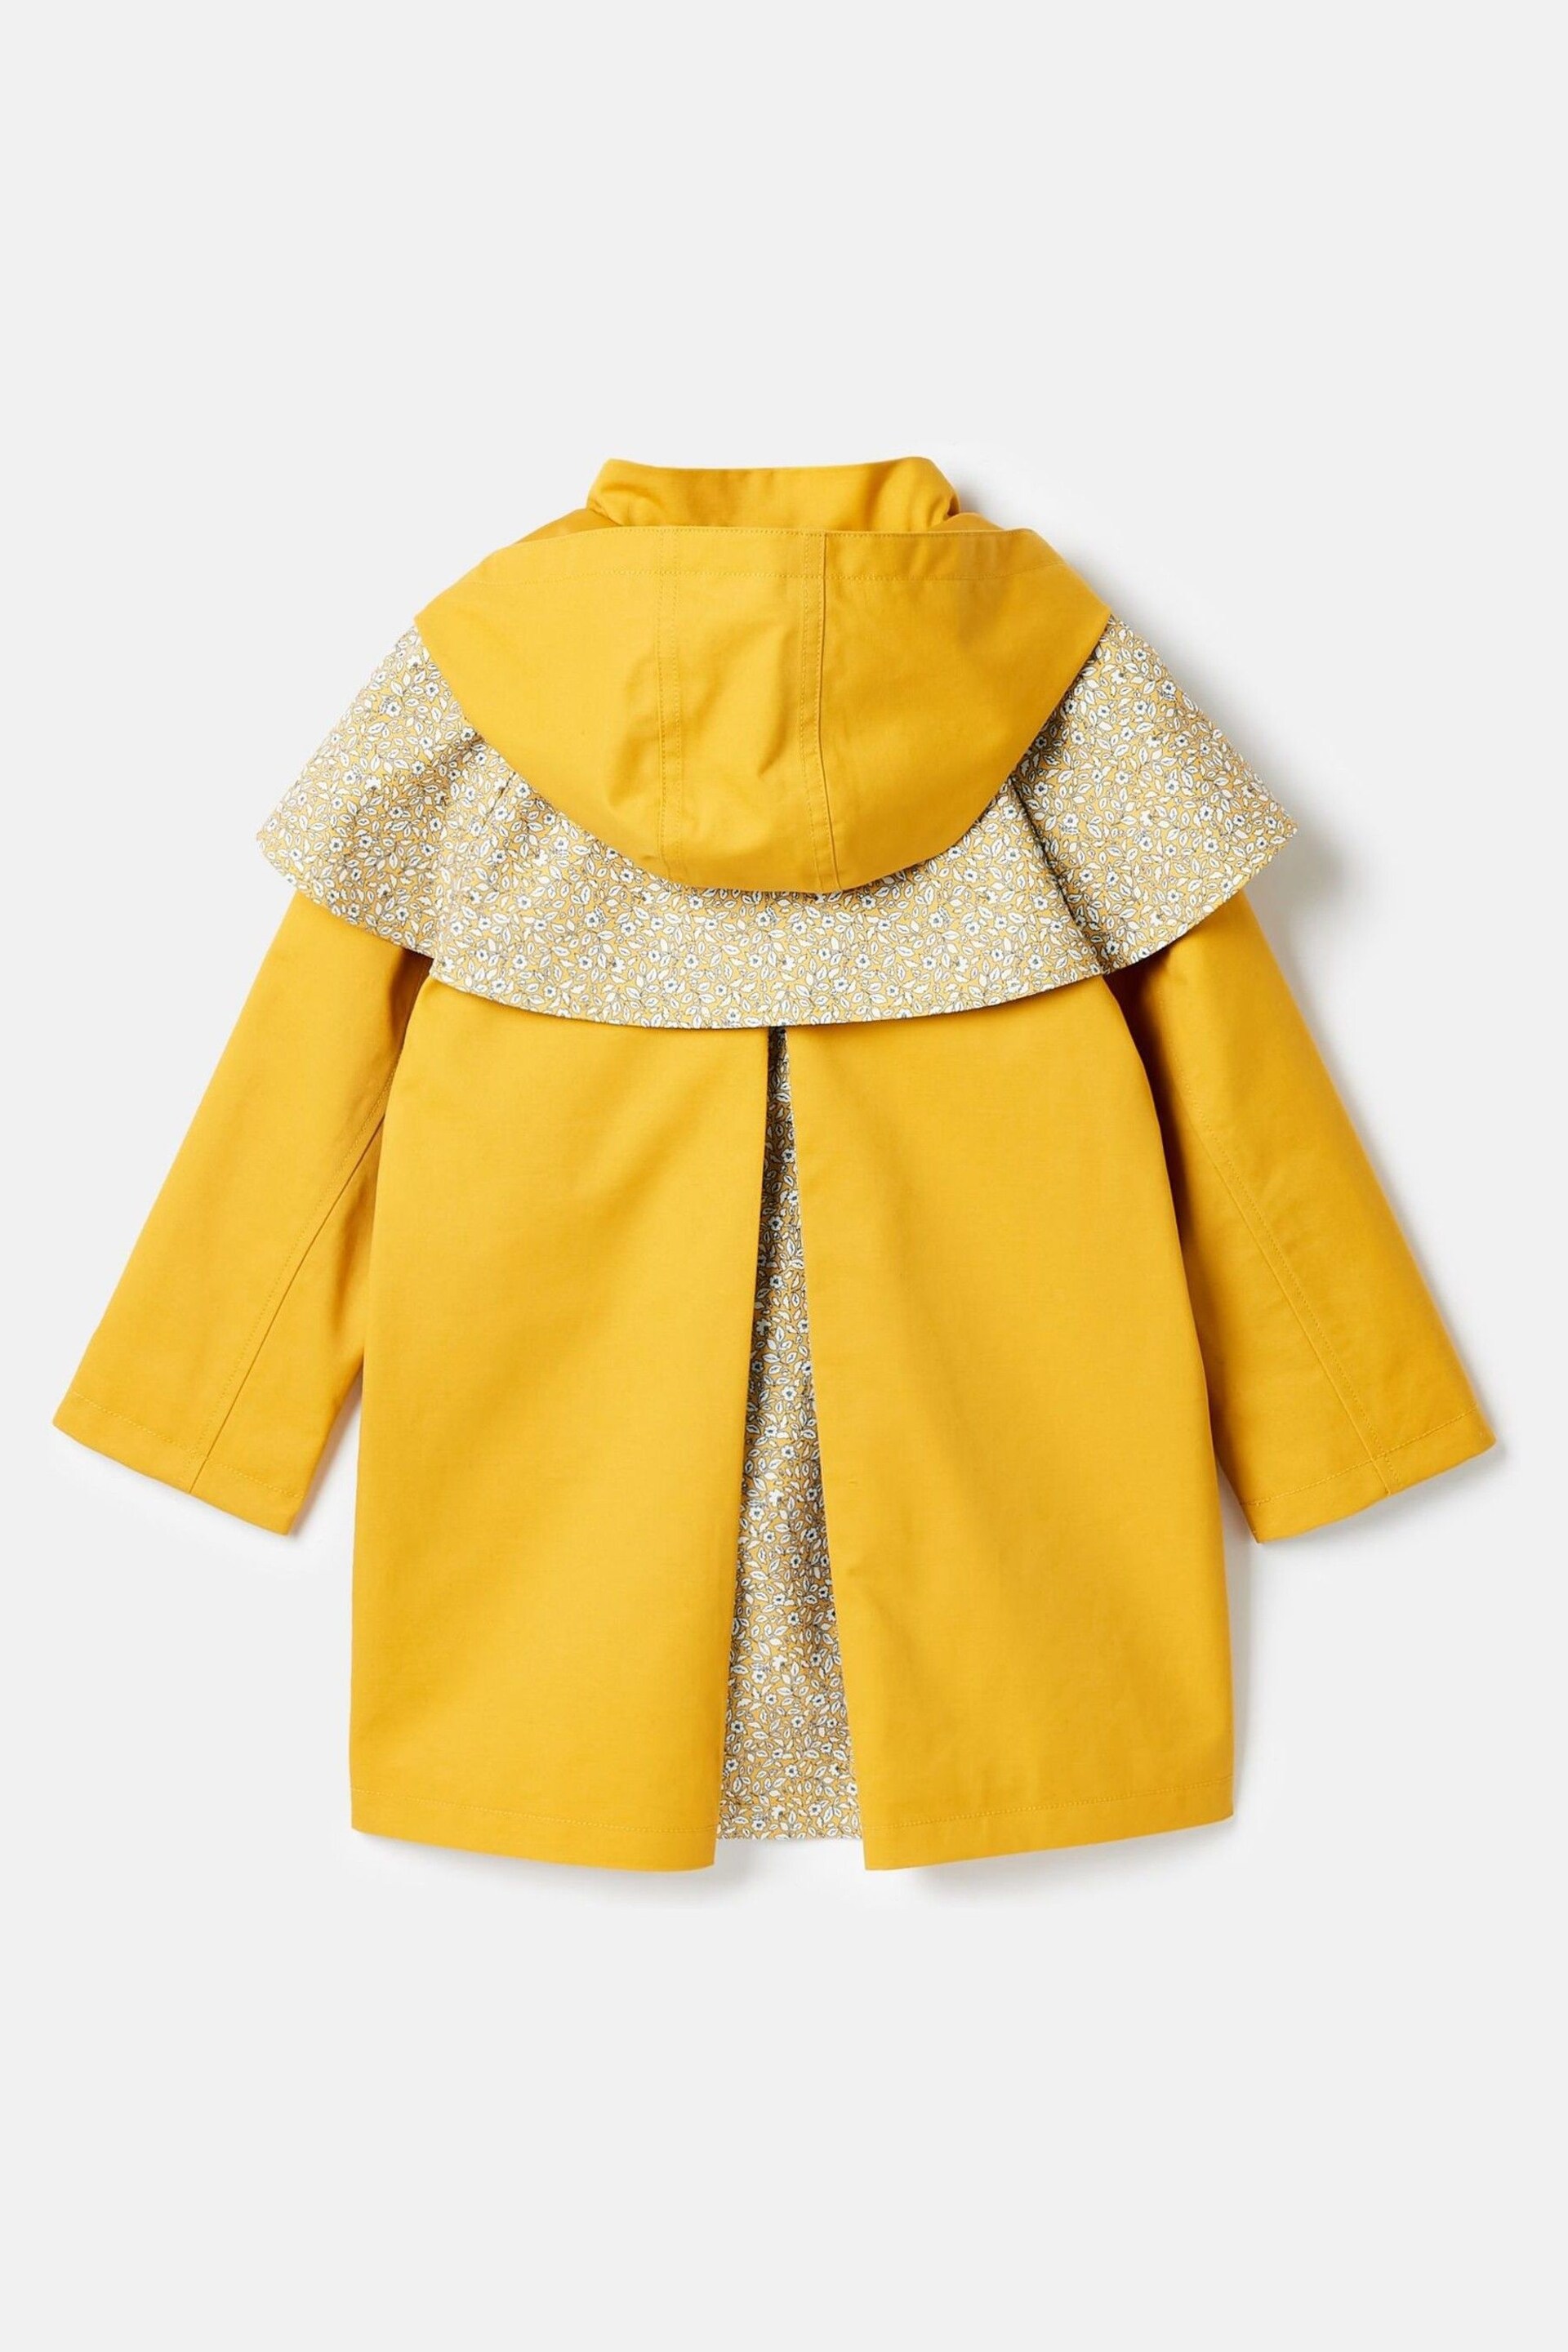 Joules Seacombe Yellow Waterproof Hooded Raincoat with Cape - Image 8 of 13